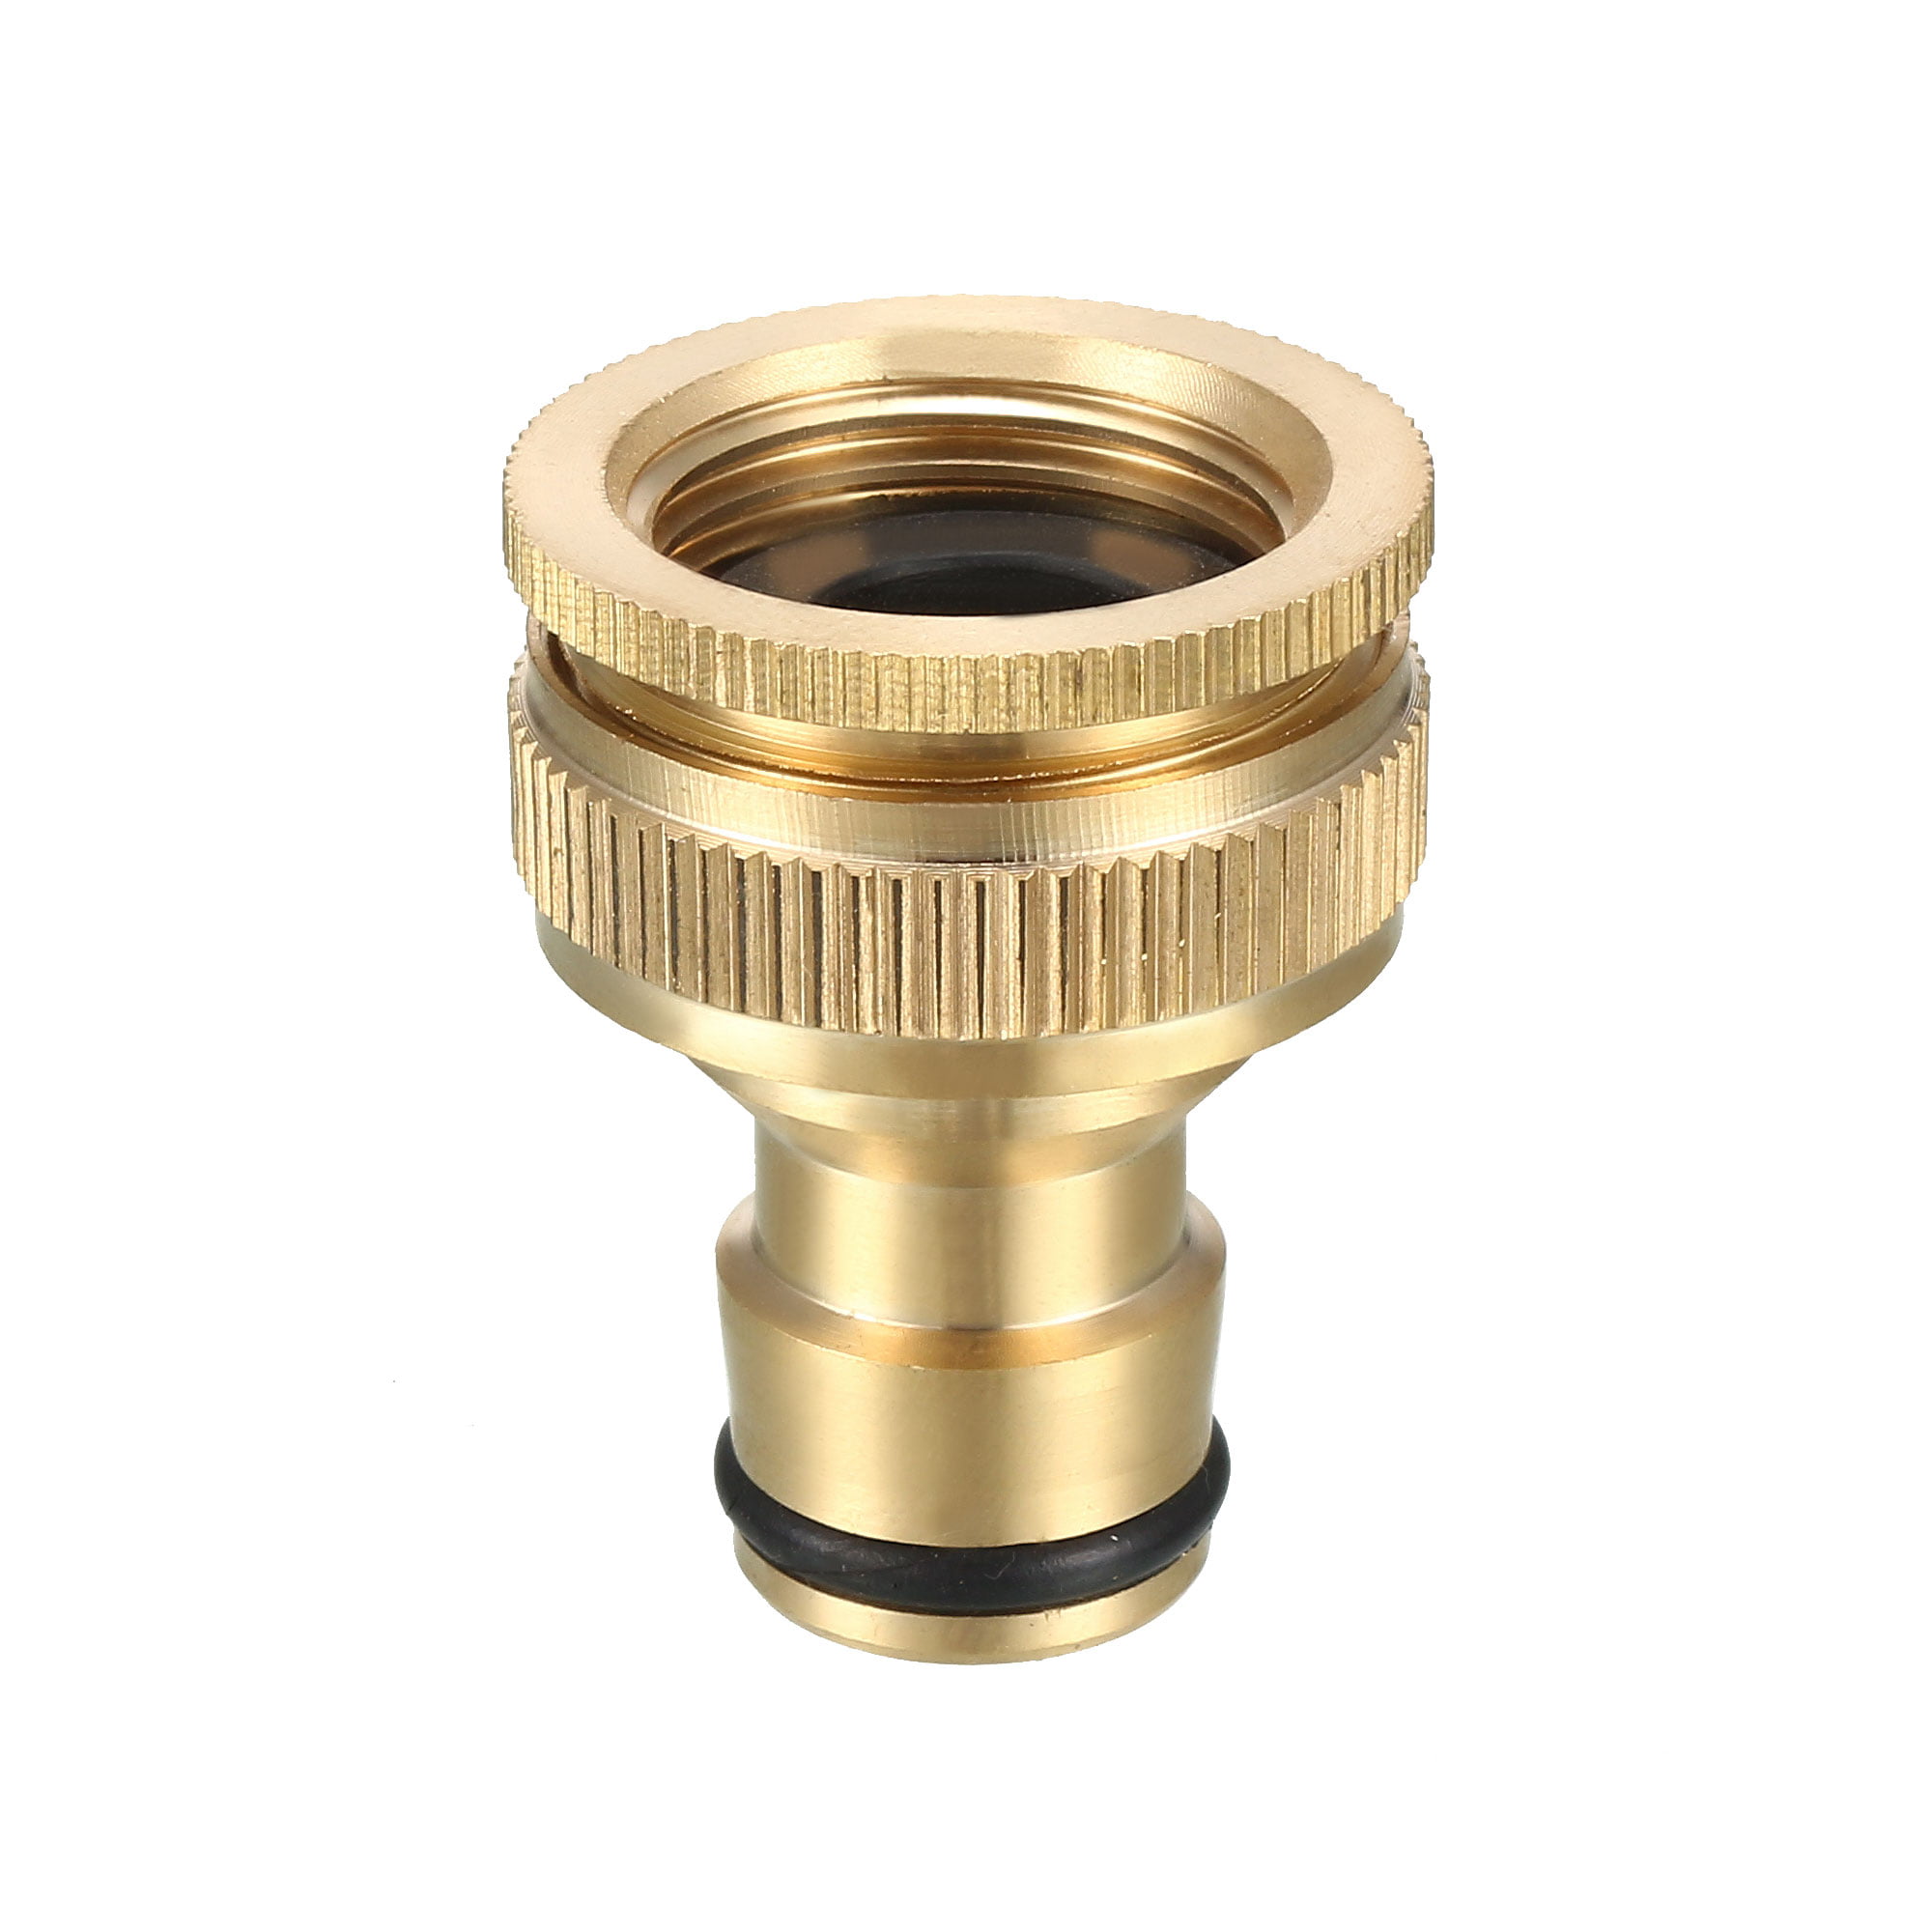 1PC Kitchen Brass Hose Tap Connector Threaded Water Pipe Adaptor Fitting UK 